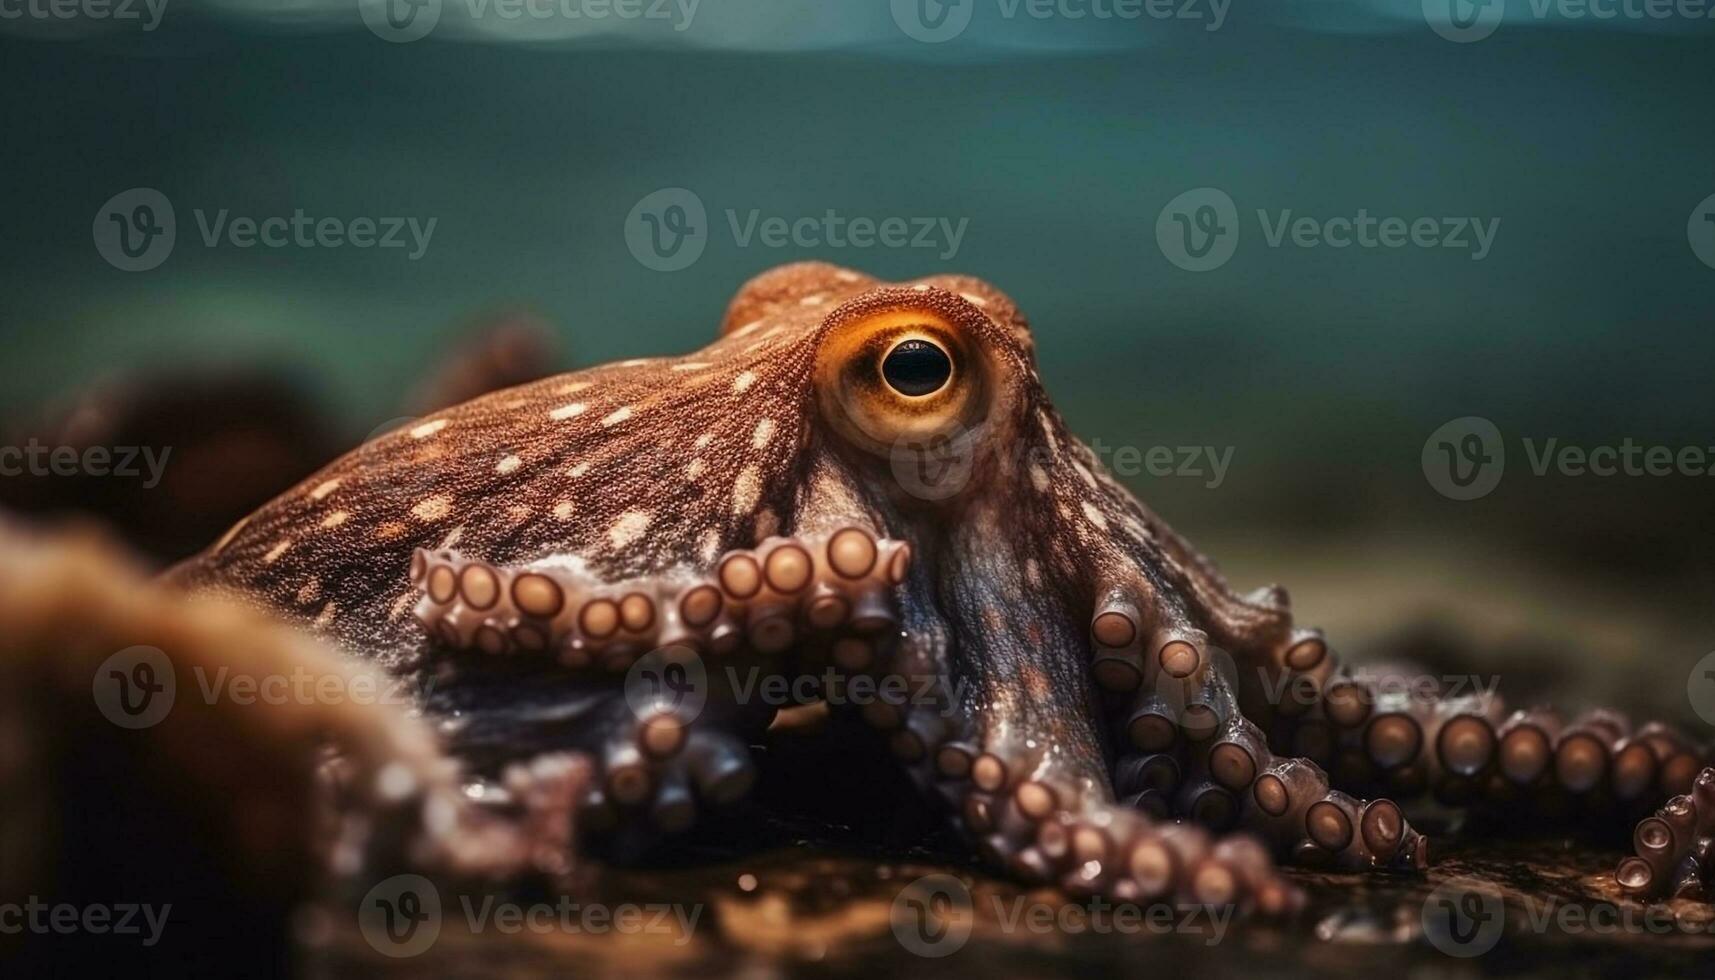 Poisonous octopus tentacle grips crab claw in underwater battle generated by AI photo